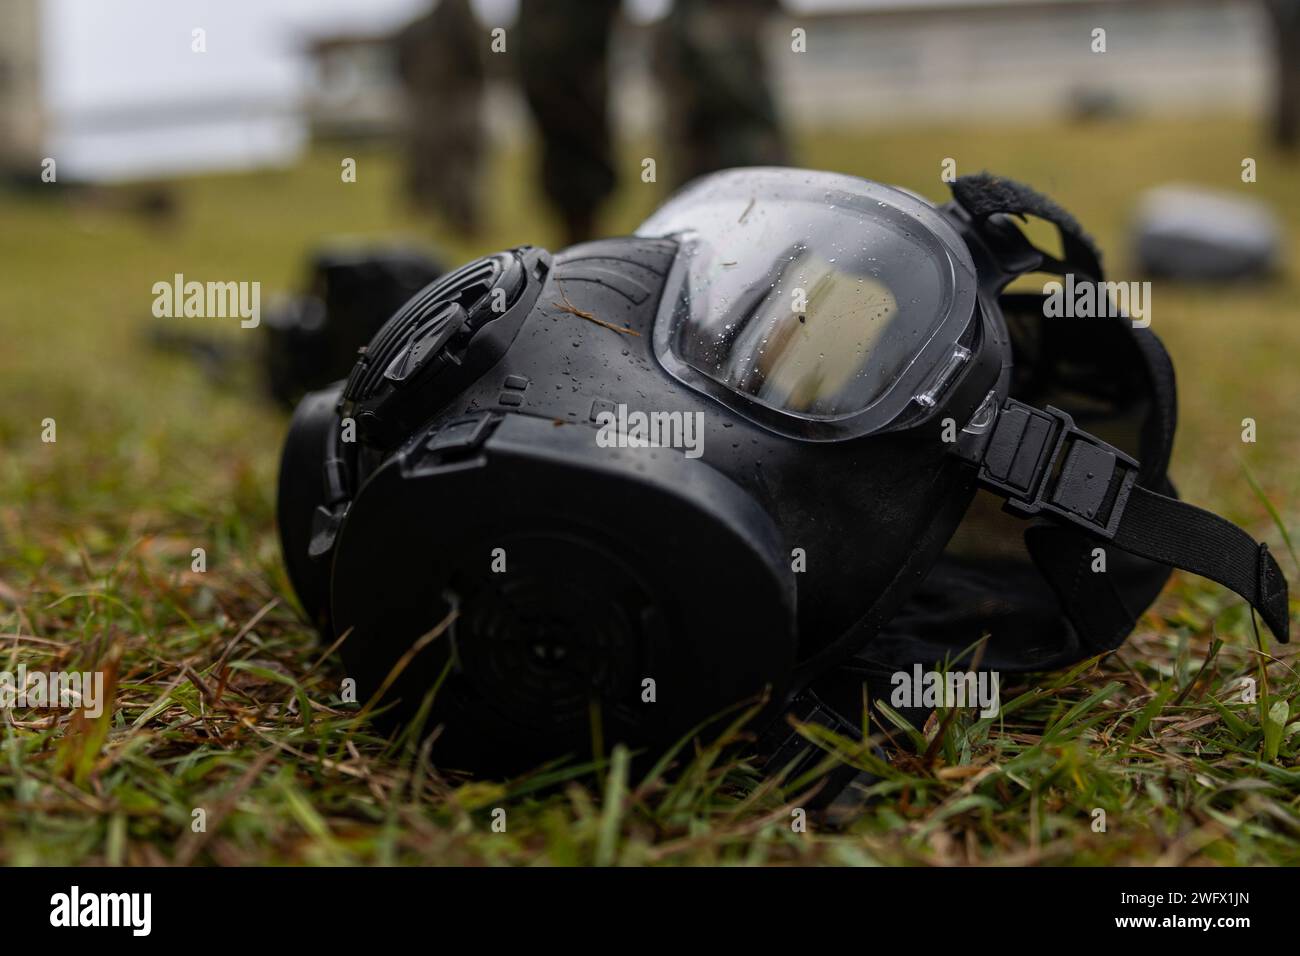 An M50 gas mask is staged on the floor after U.S. Marines across III Marine Expeditionary Force (MEF) participated in a chemical biological radiological nuclear defense training event hosted by III MEF at Marine Corps Air Station Futenma, Okinawa, Japan, Jan. 23, 2023. III MEF conducted this event to develop skills in sensitive site exploitation and to sustain investigative capabilities. Stock Photo